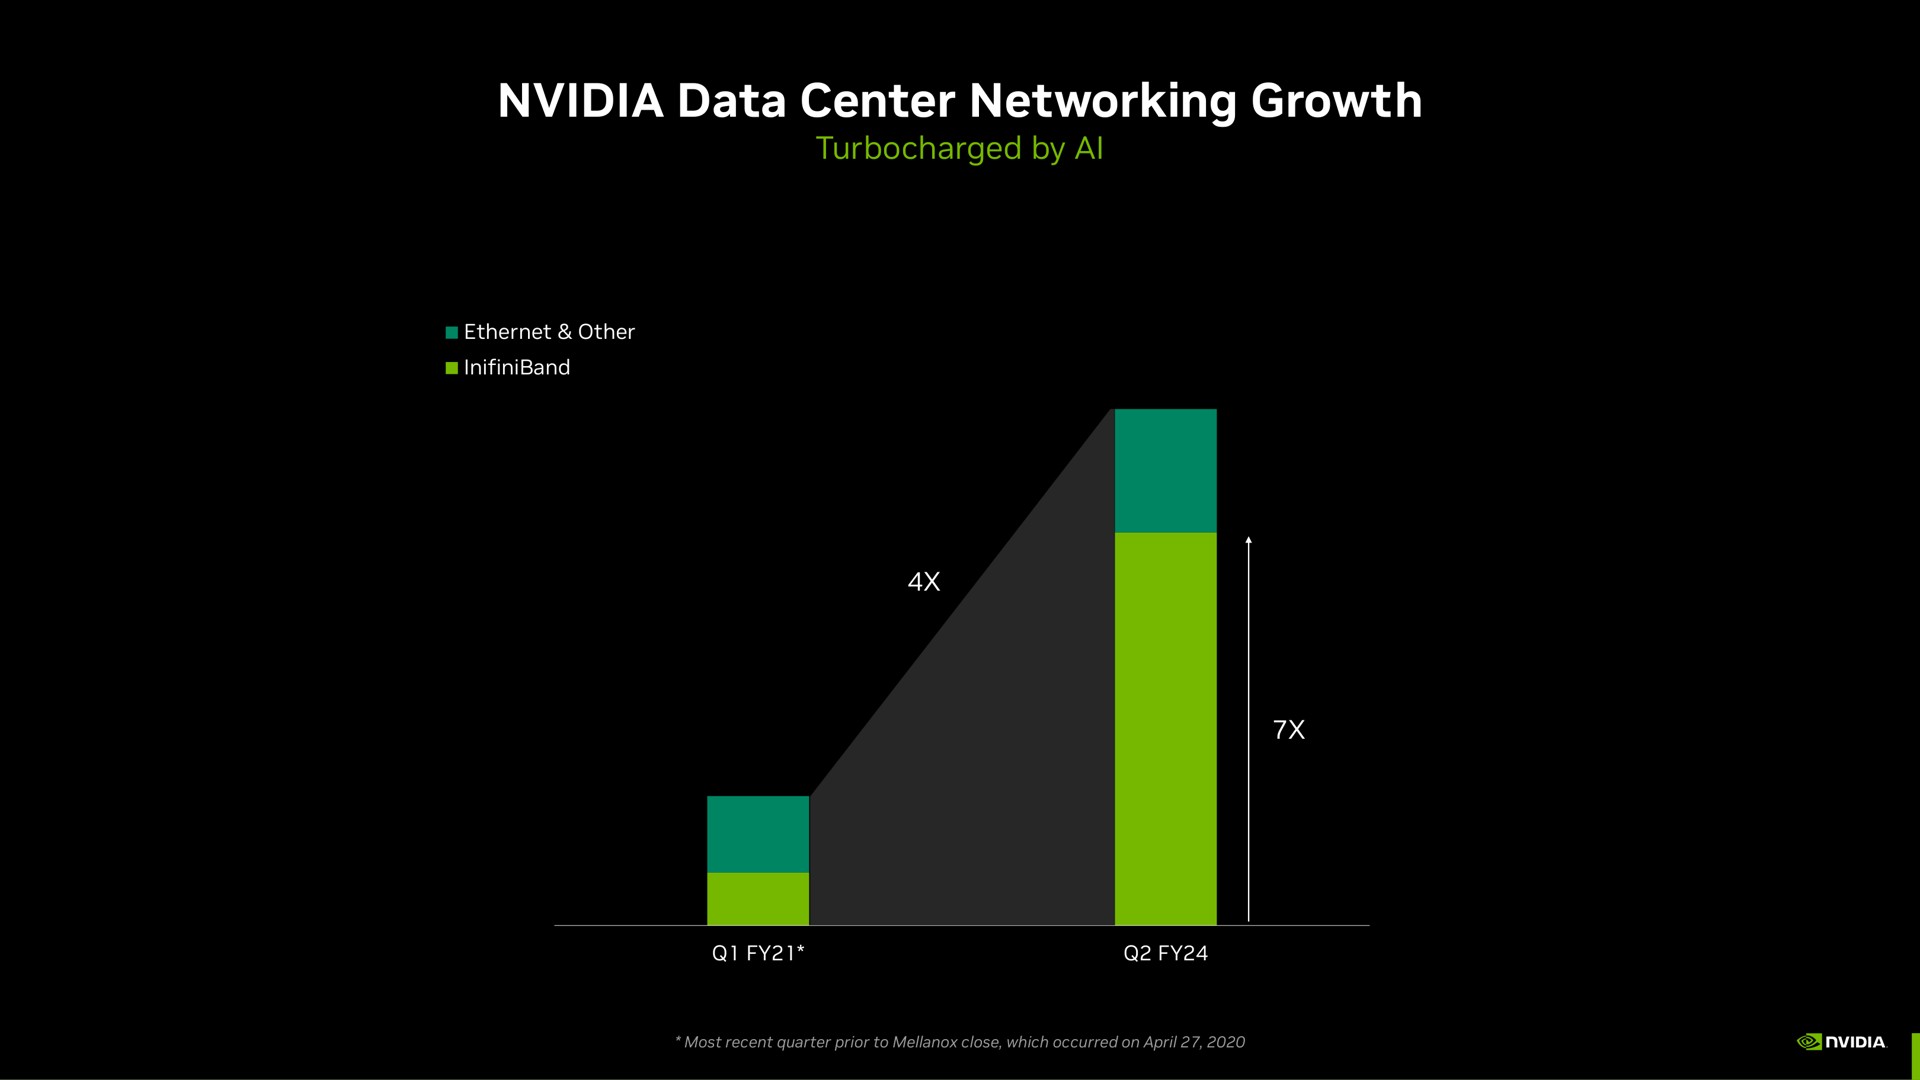 data center networking growth | NVIDIA